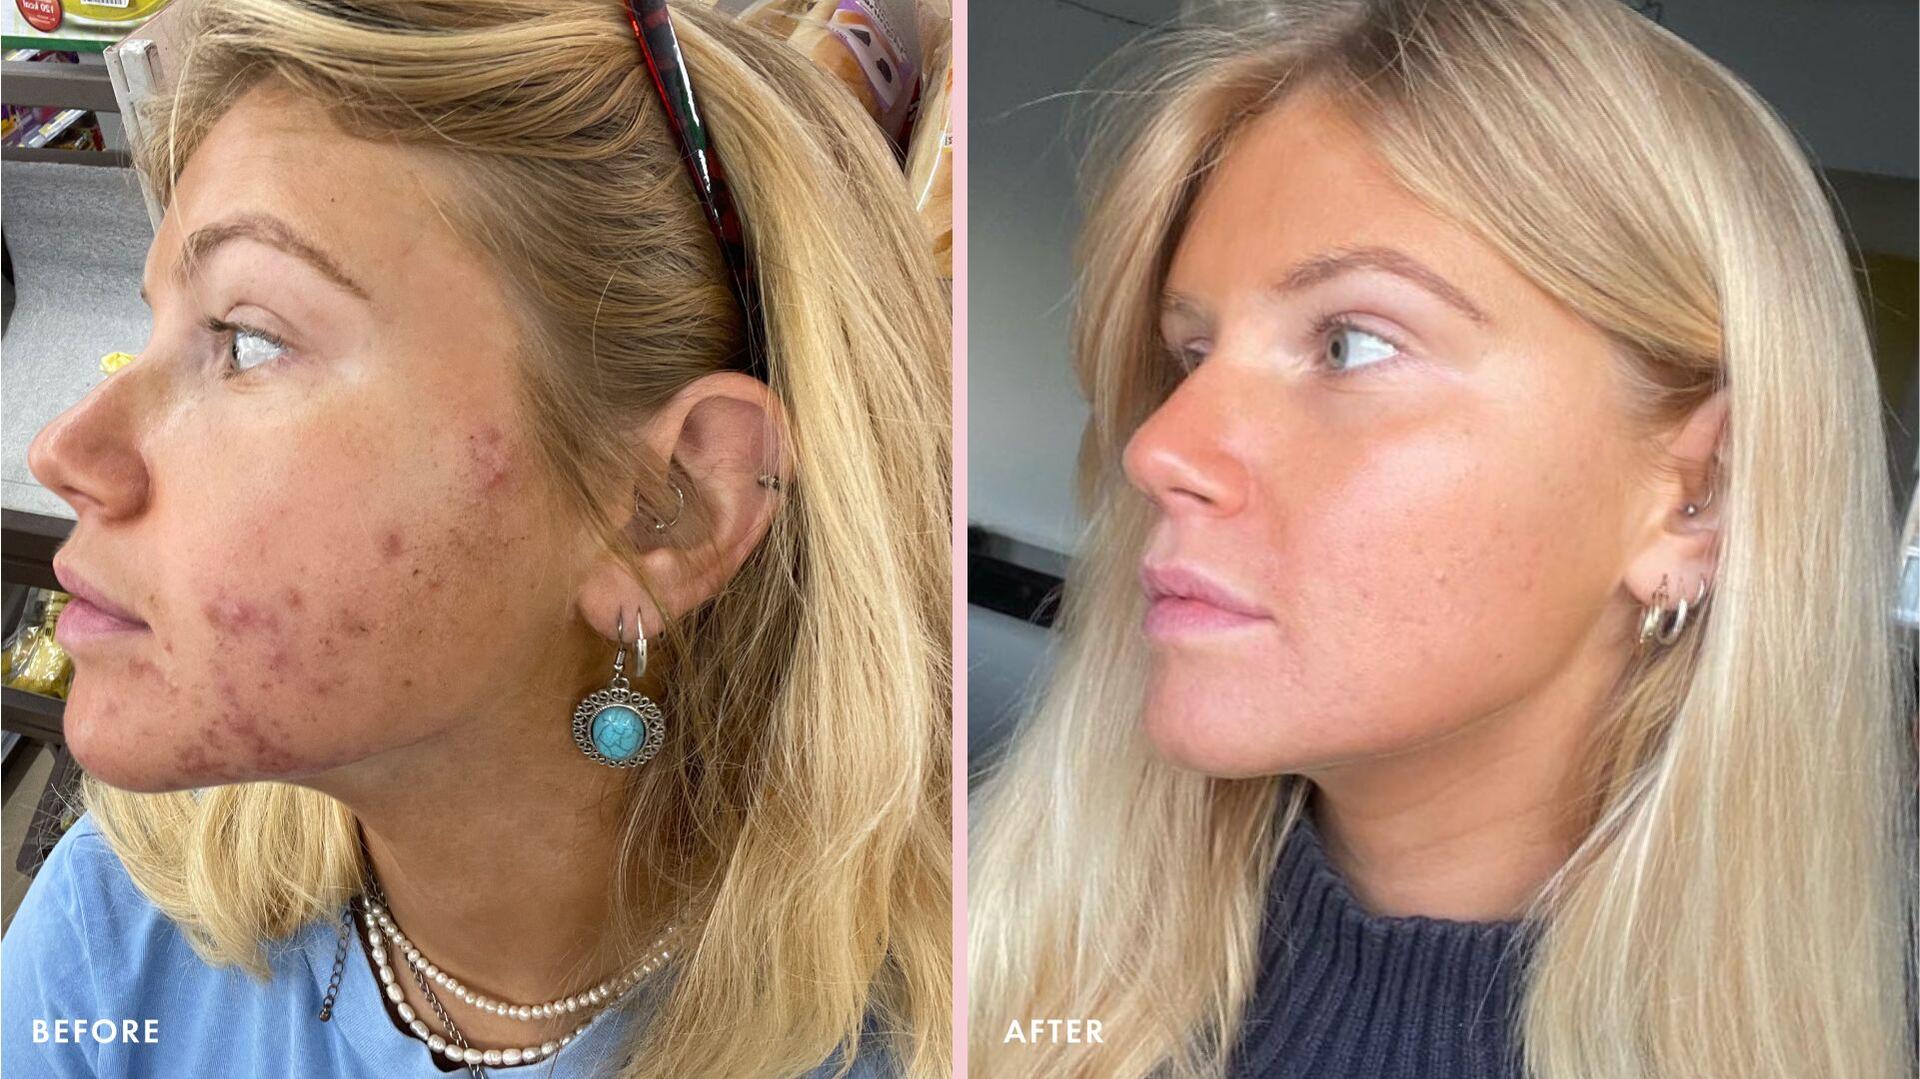 Millie Godfrey's before and after from acne